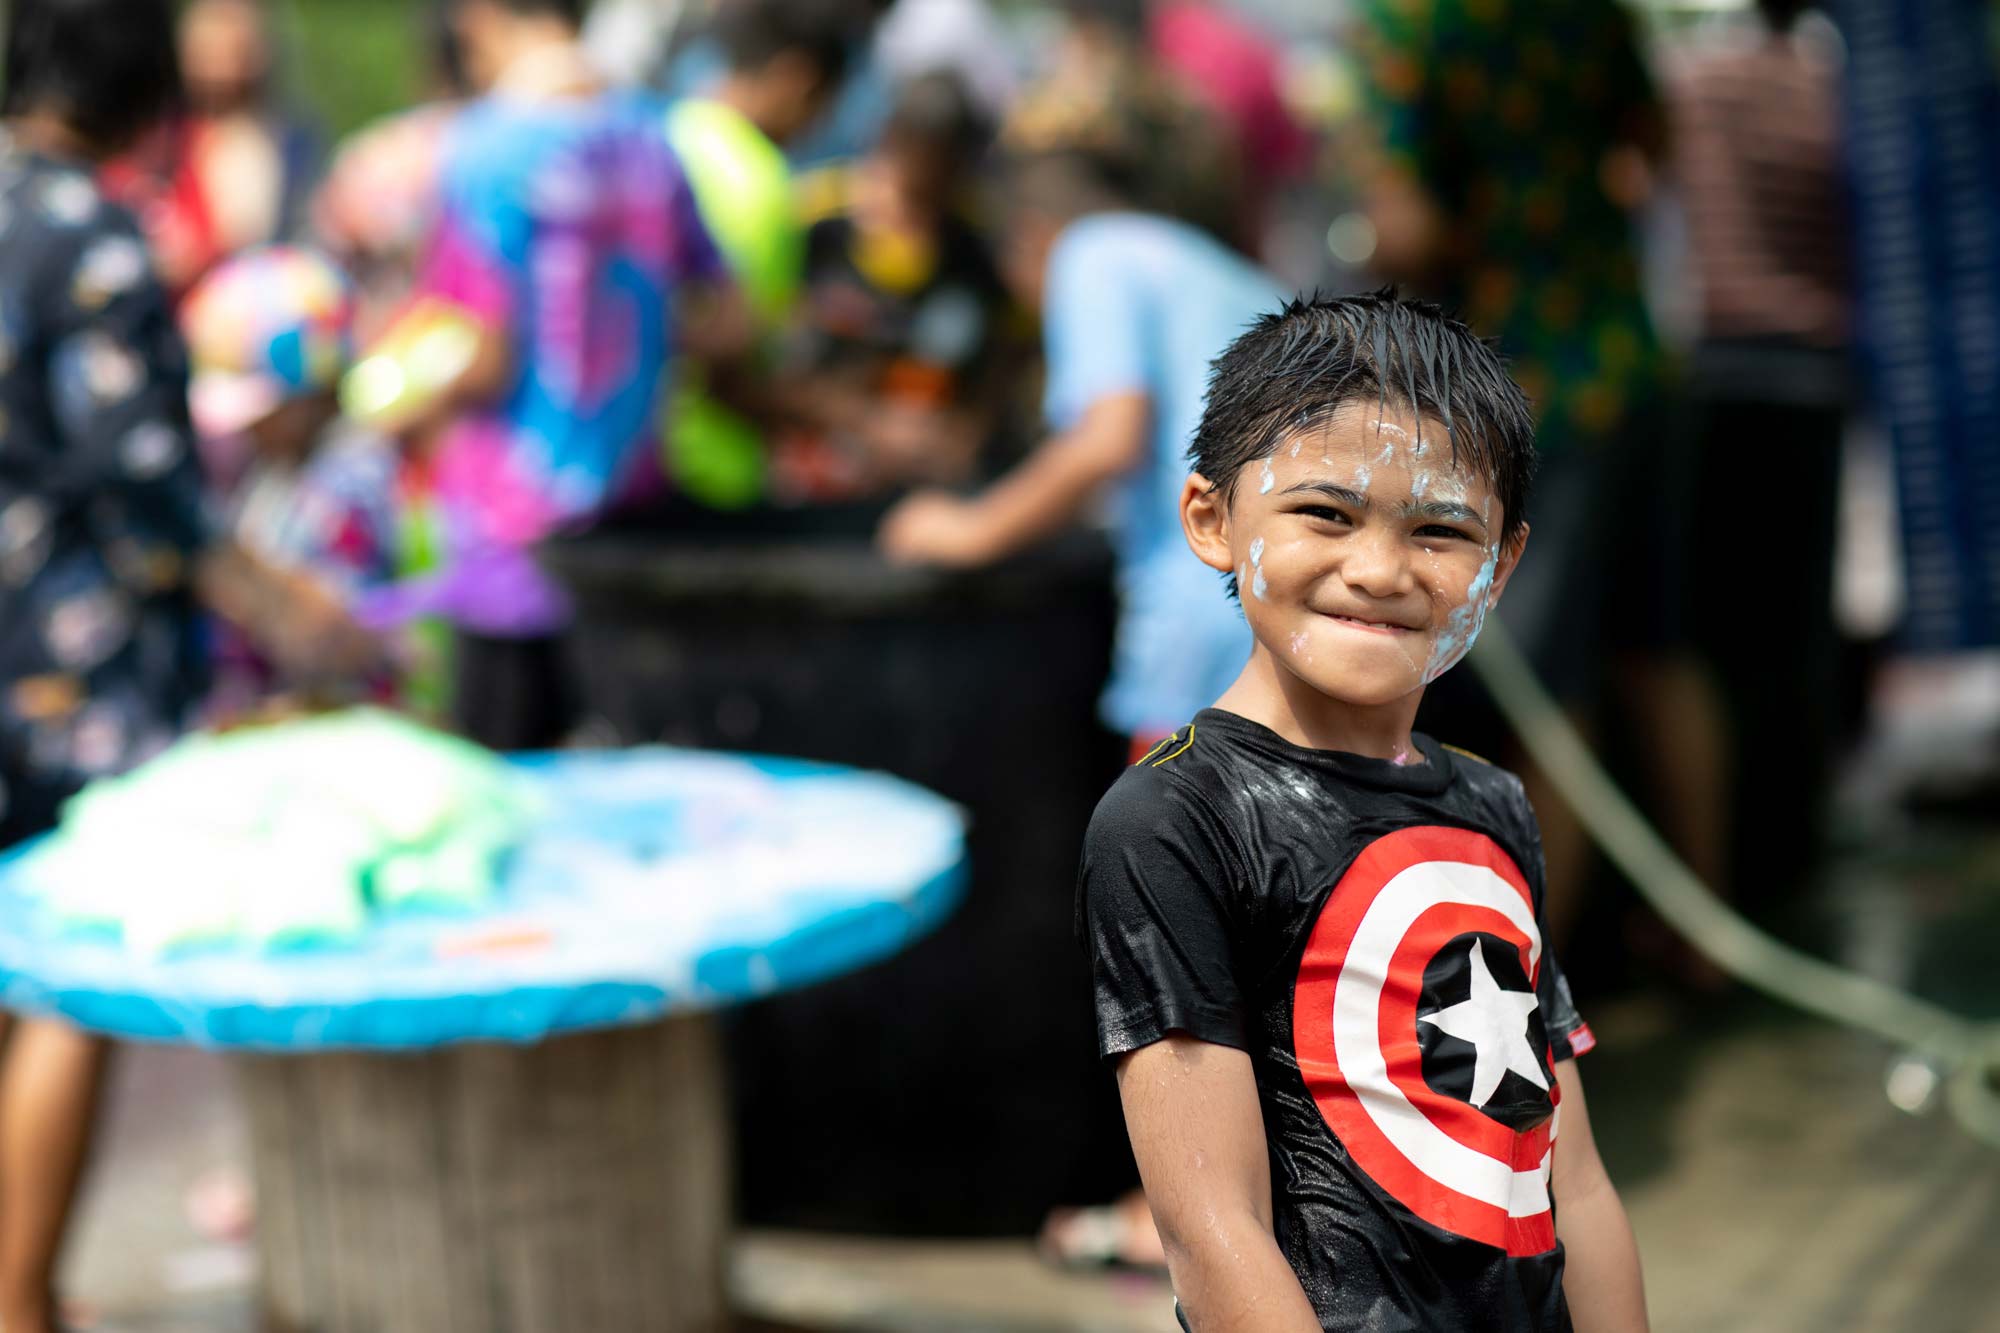 Smiling Boy with painted face | Songkran Thailand | Travel Phogoraphy | Portrait Photography